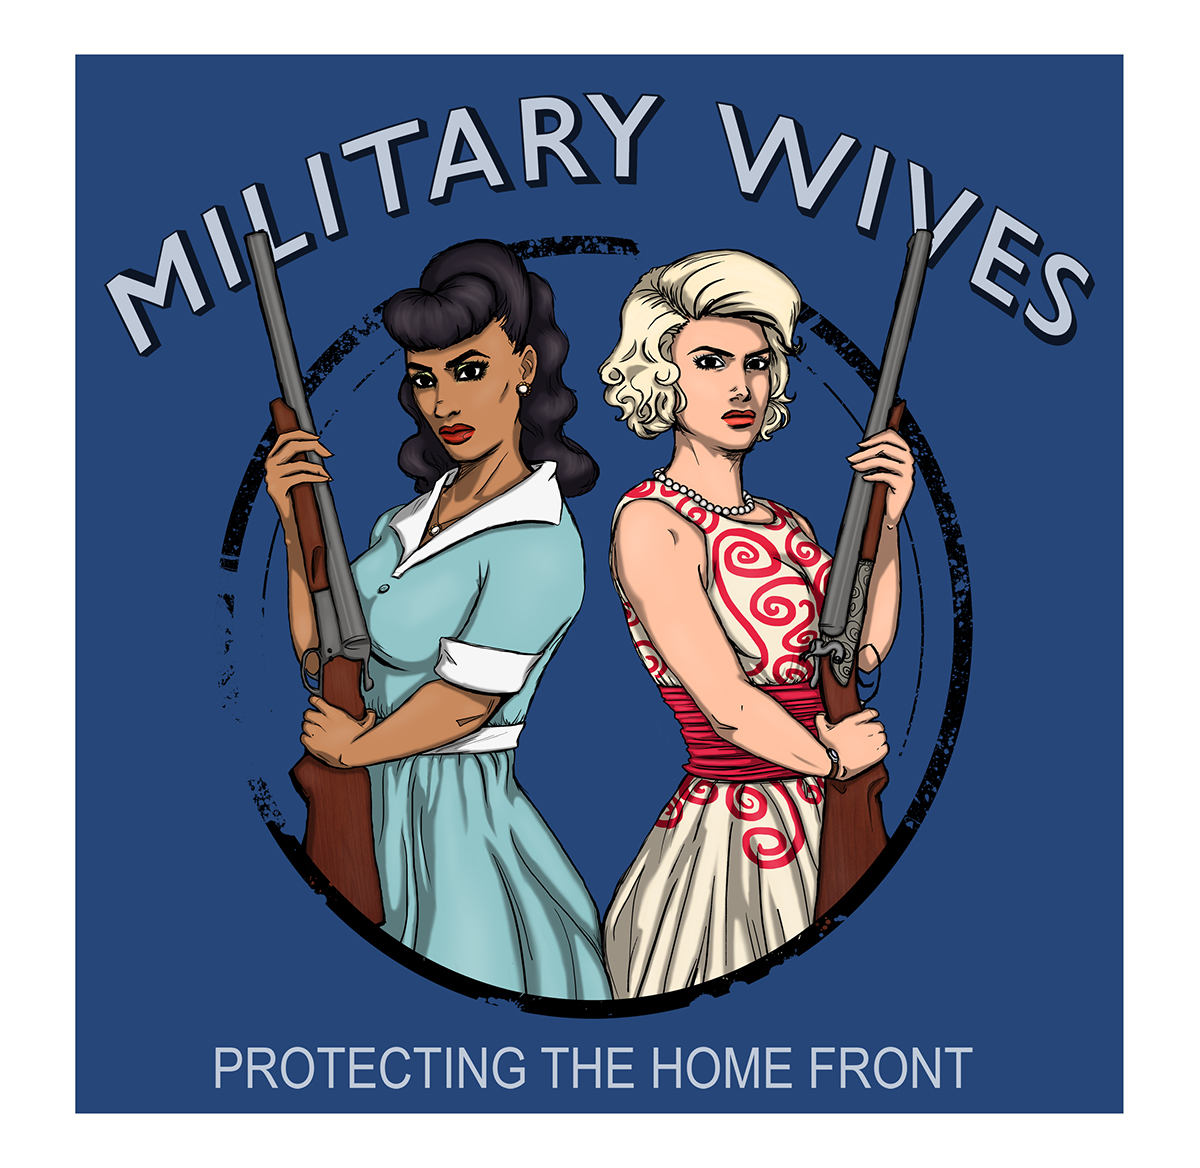 military wives  Military wives